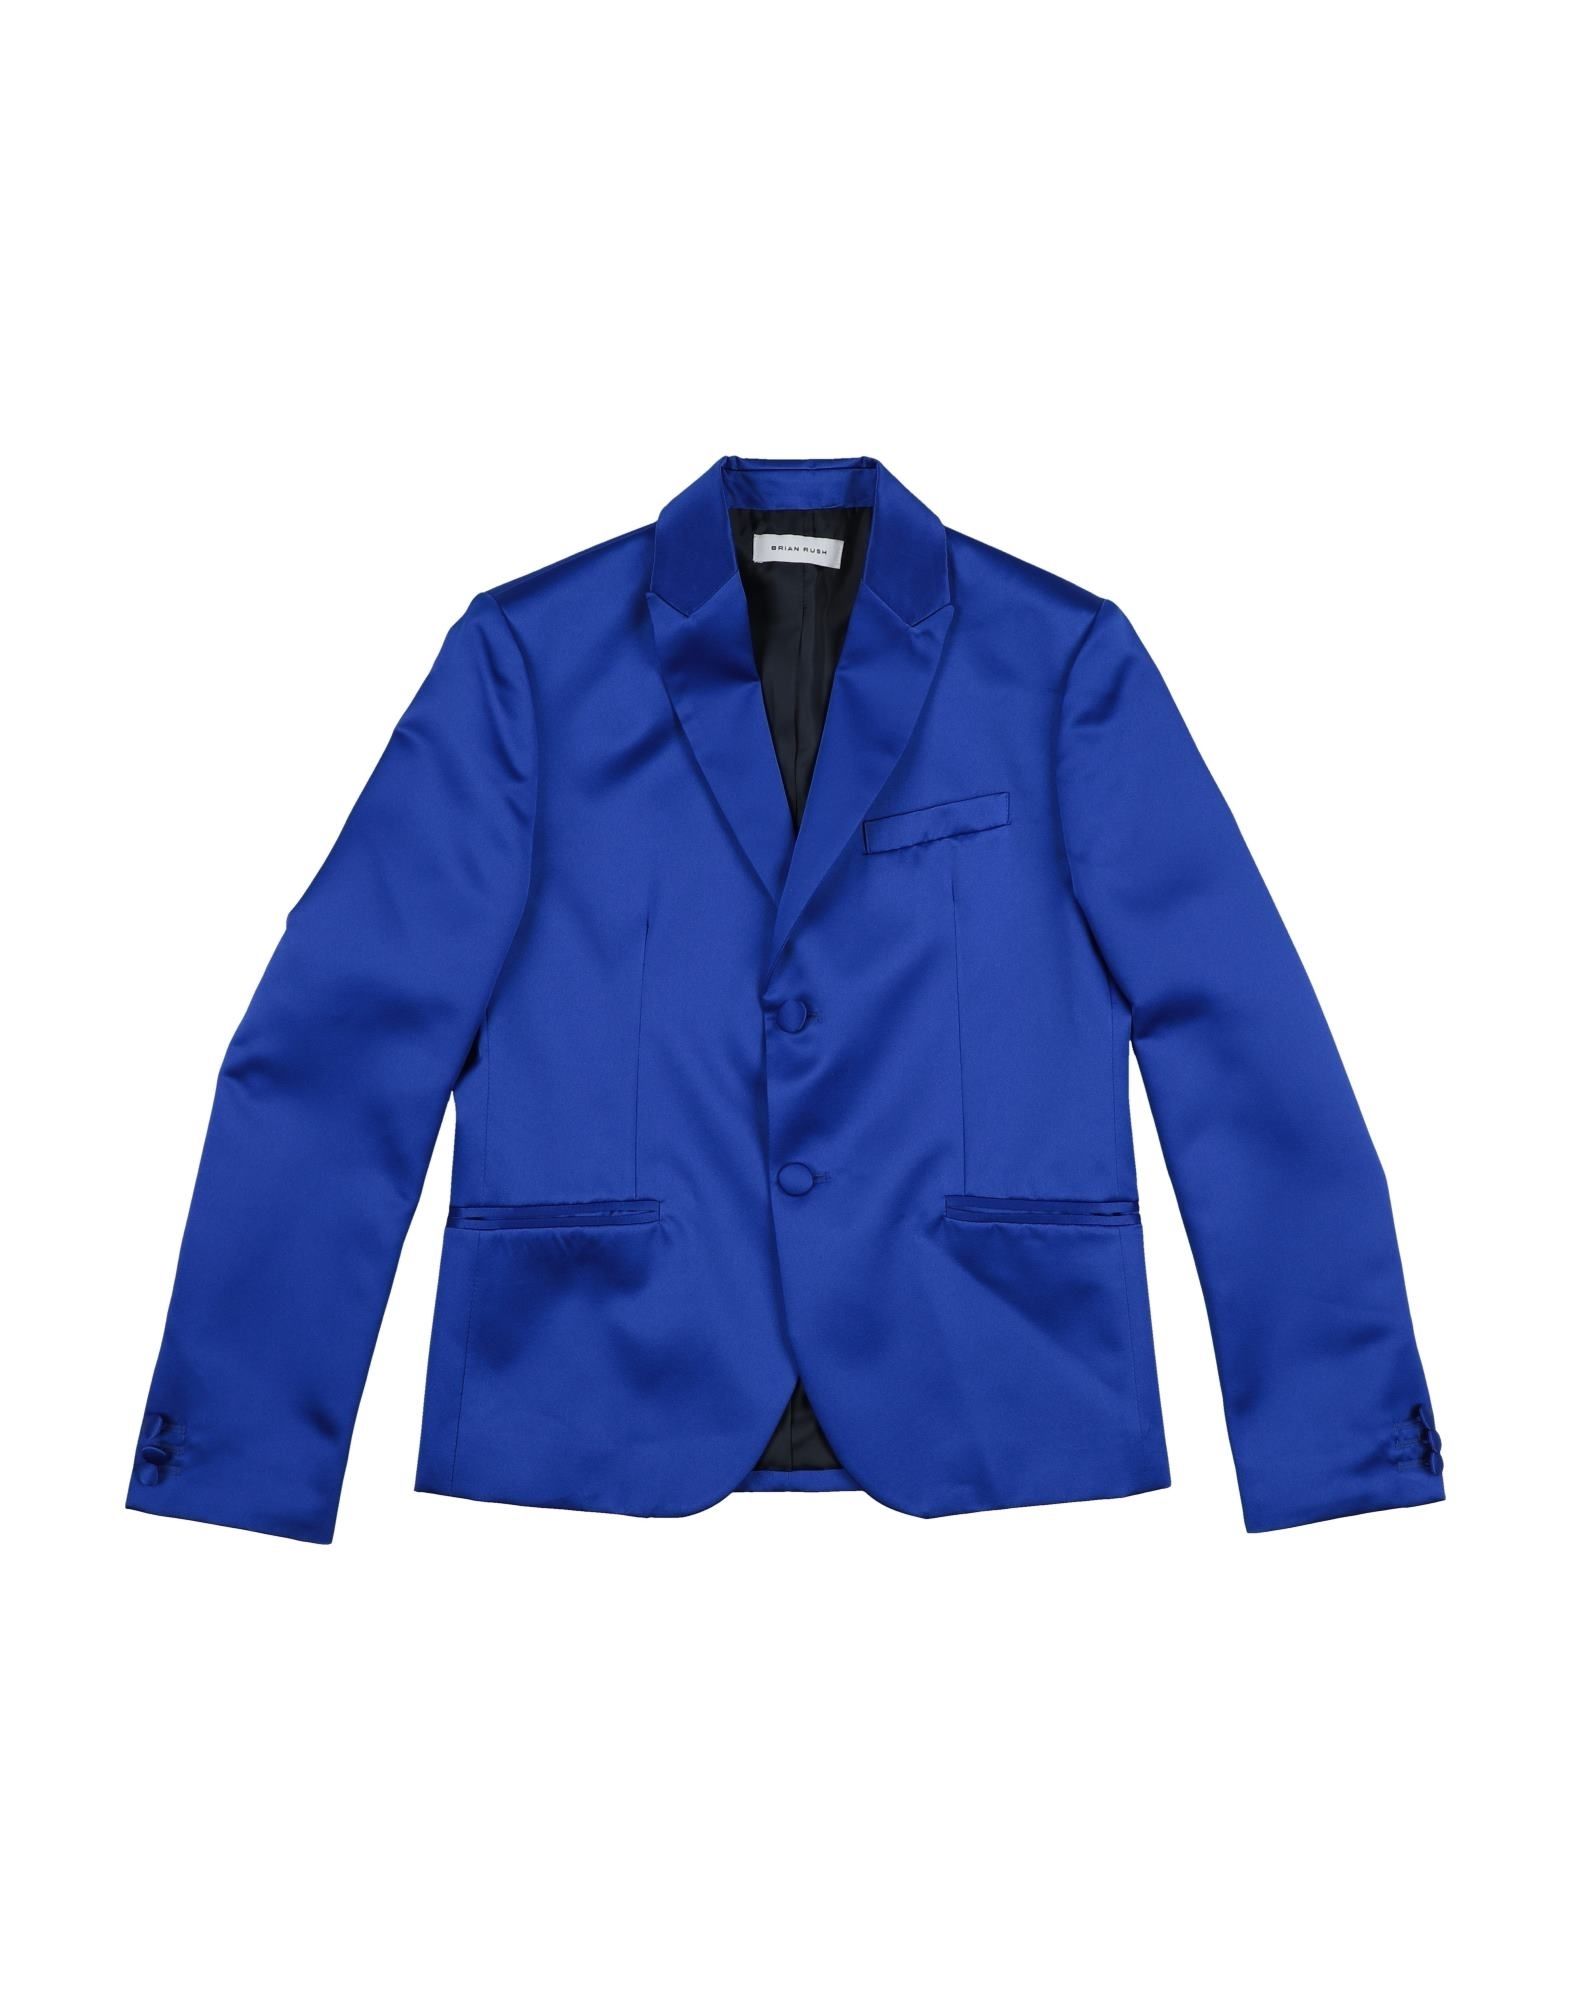 Brian Rush Kids' Suit Jackets In Bright Blue